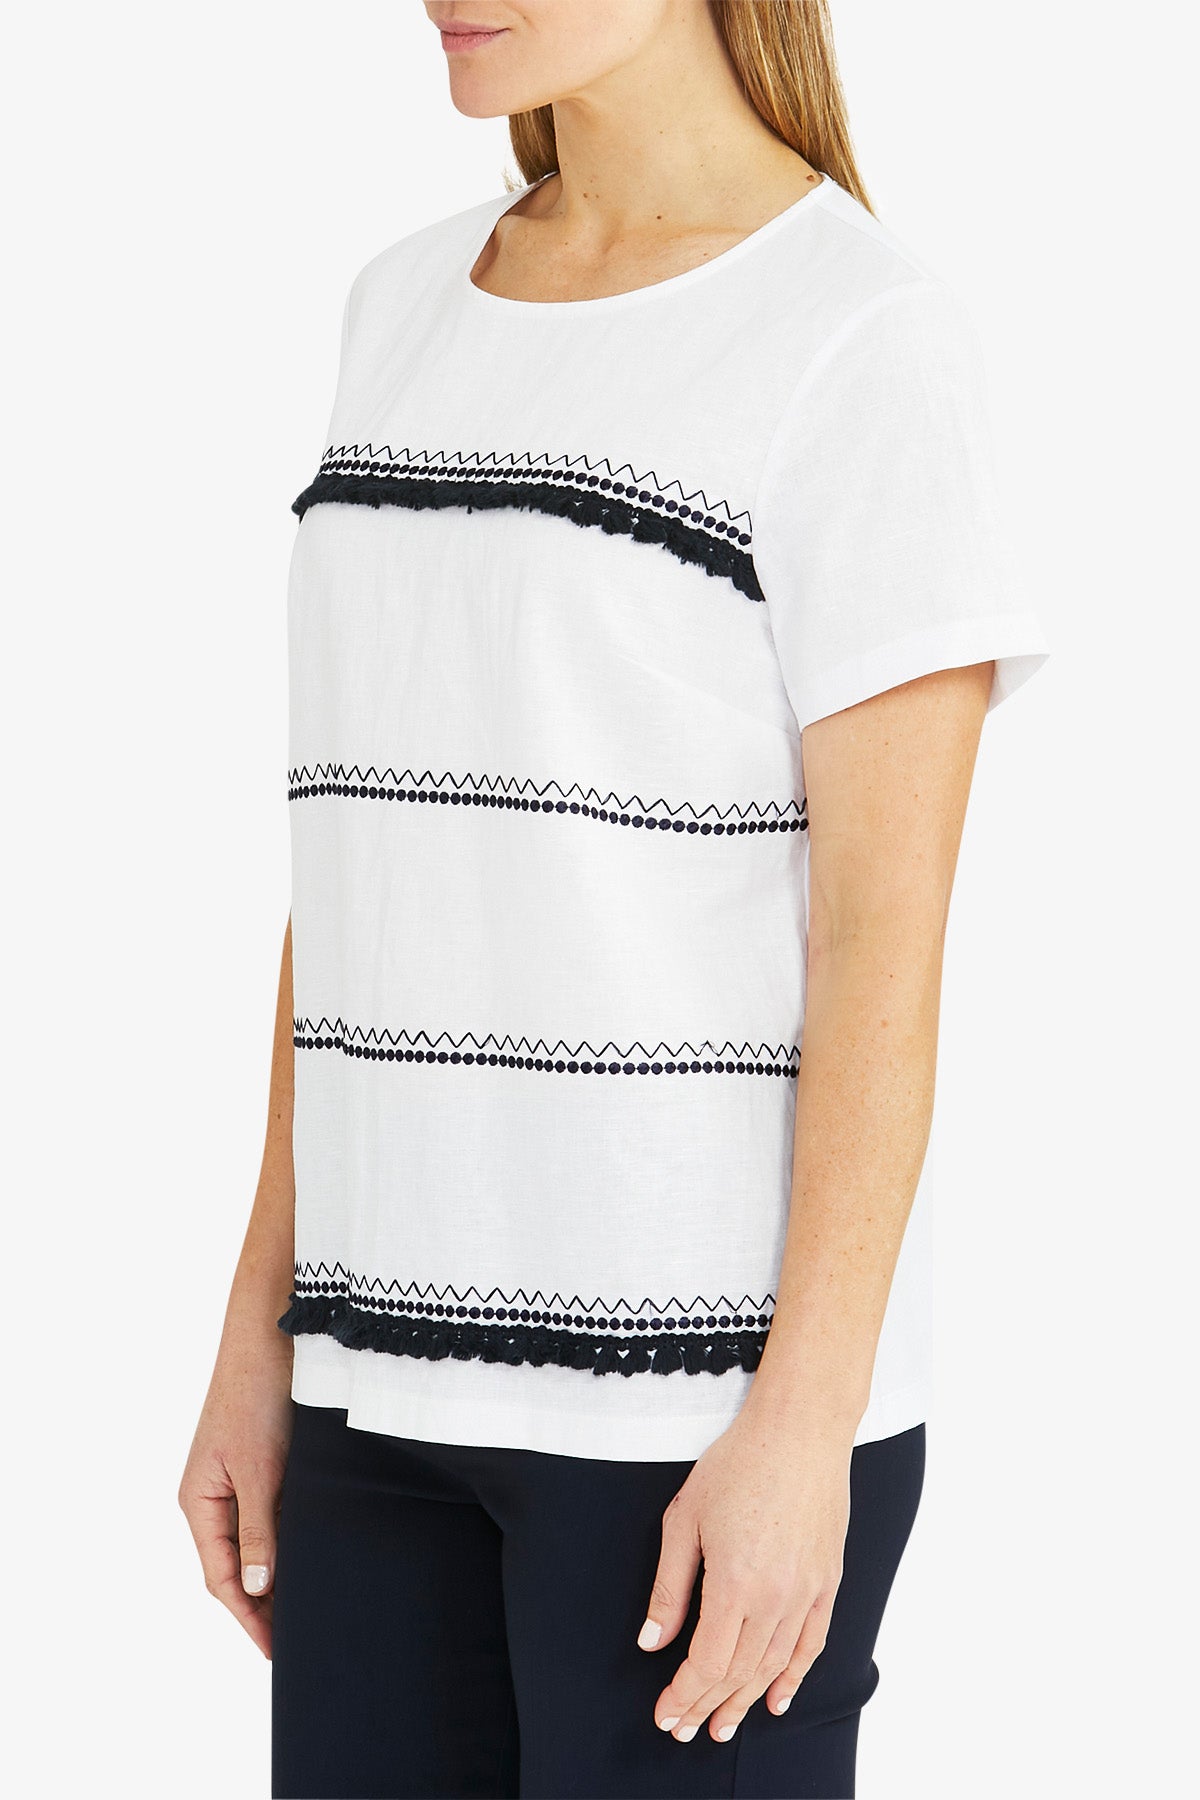 Short Sleeve Embroidered Top White and Navy